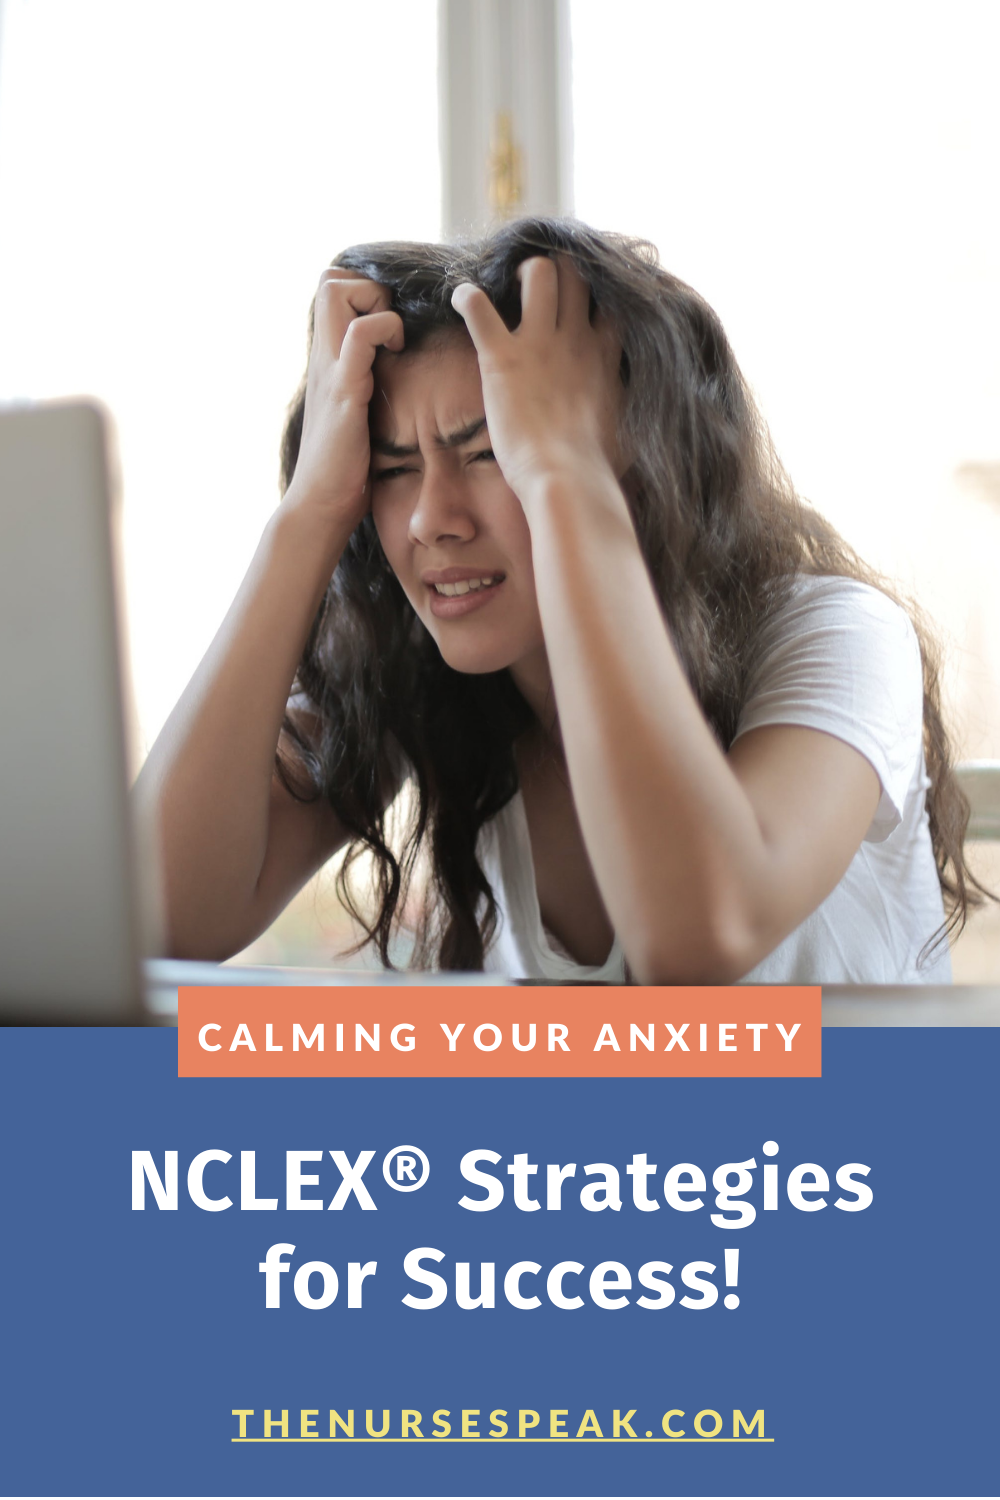 NCLEX Strategies for Success: Calming Your Anxiety